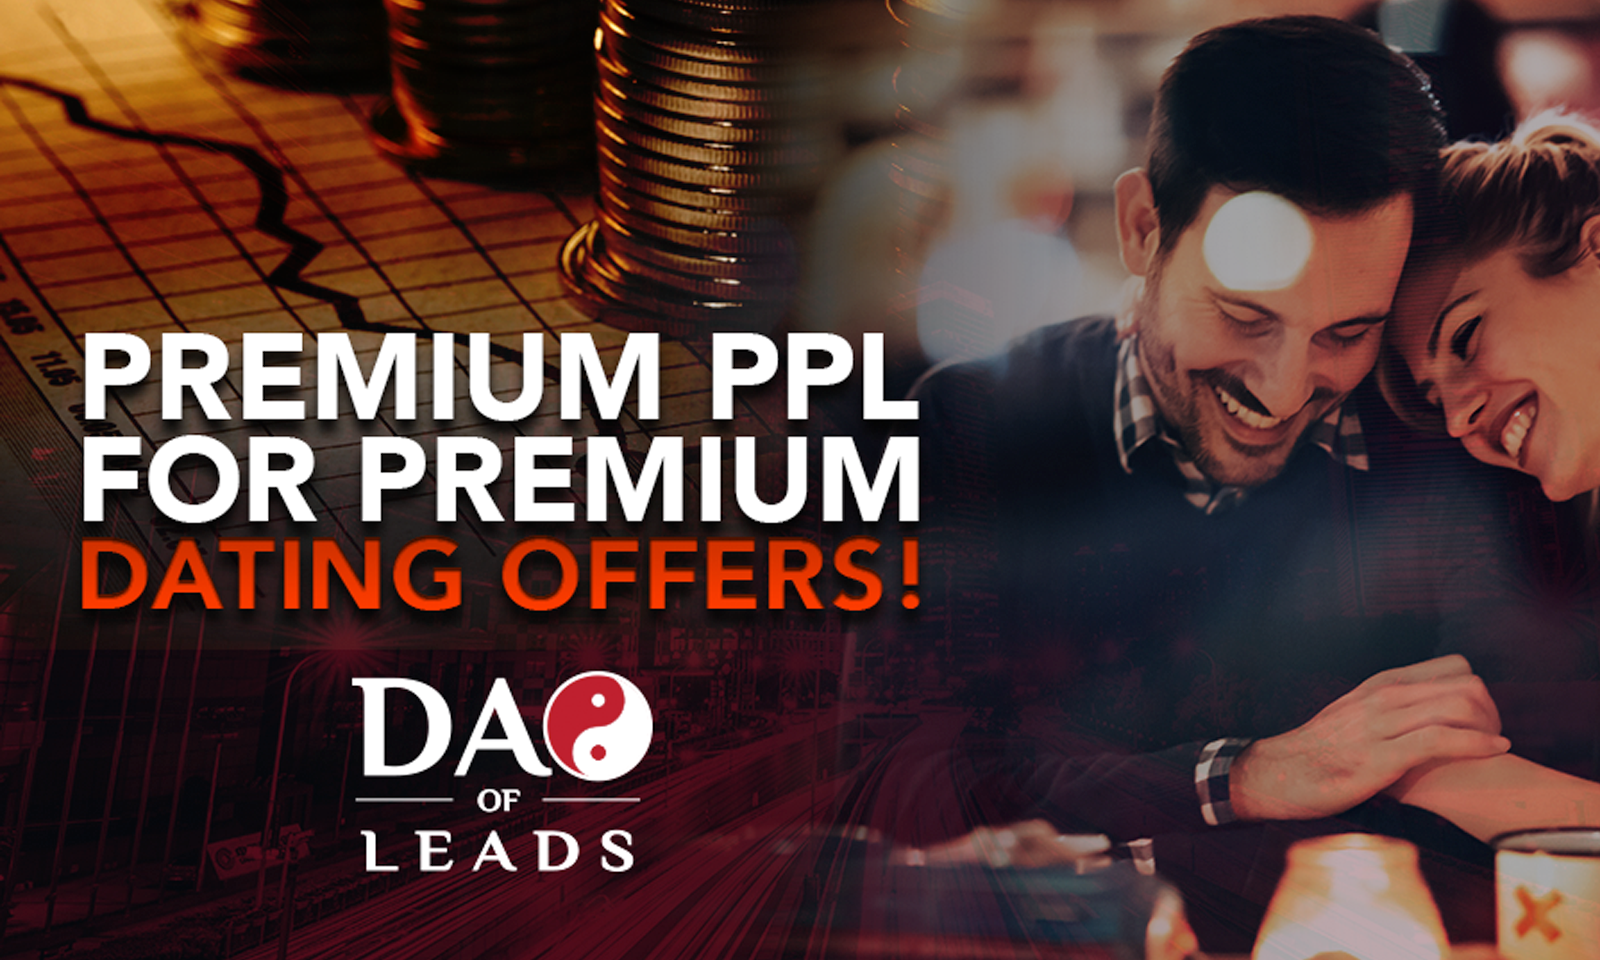 DAO of LEADS Announces Premium CPL Payouts for its Exclusive Dati